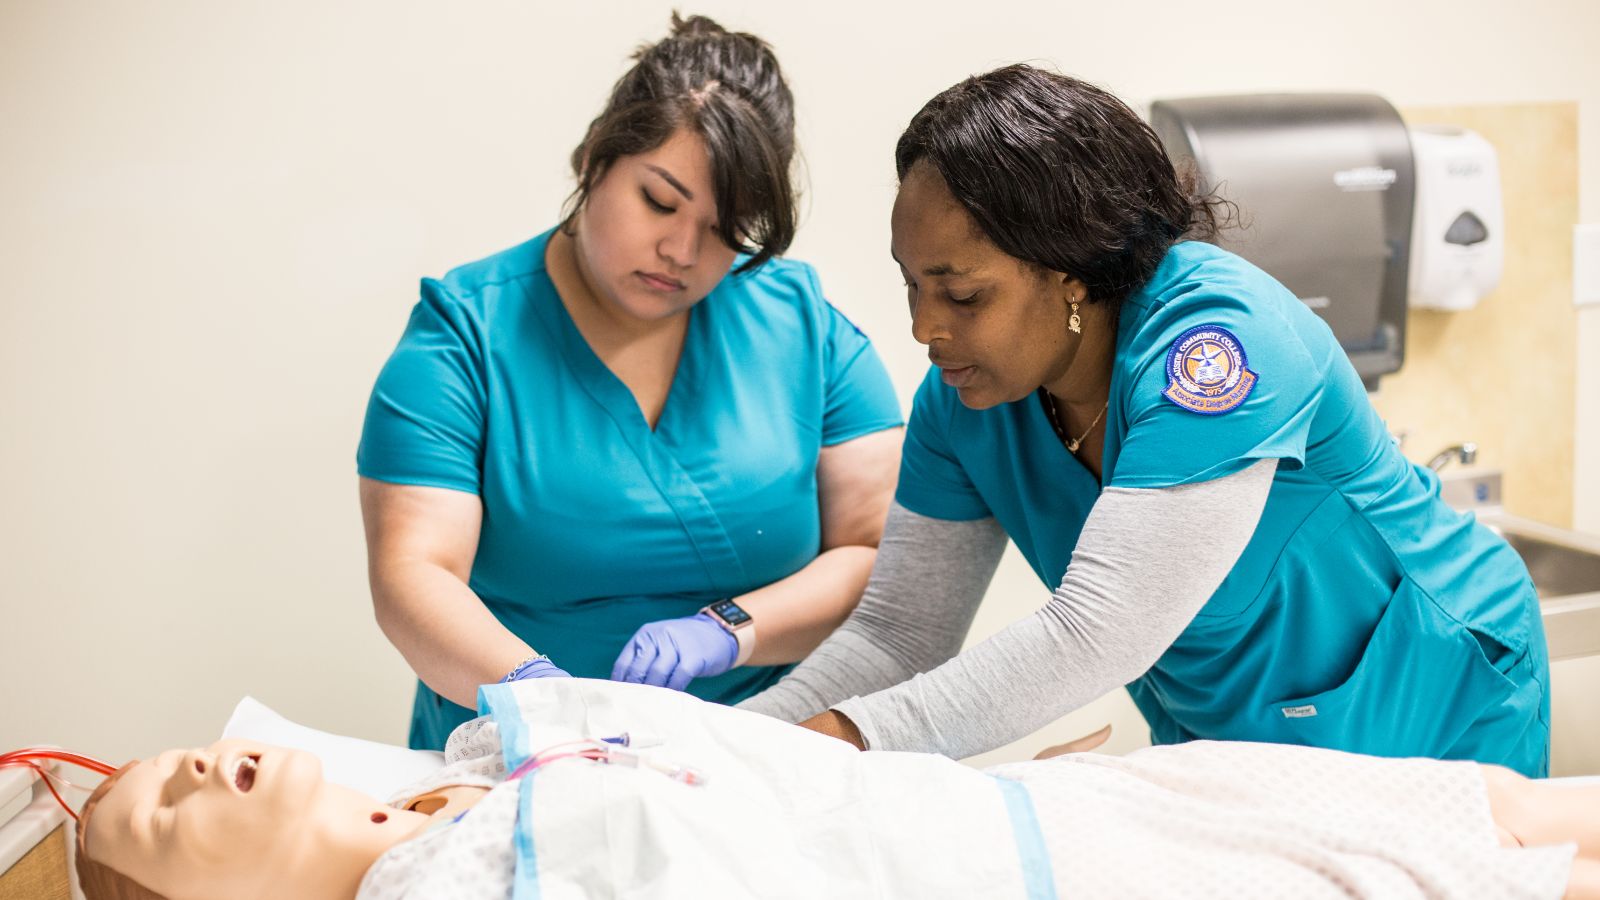 Students studying in ACC's accelerated nursing program practice medical skills